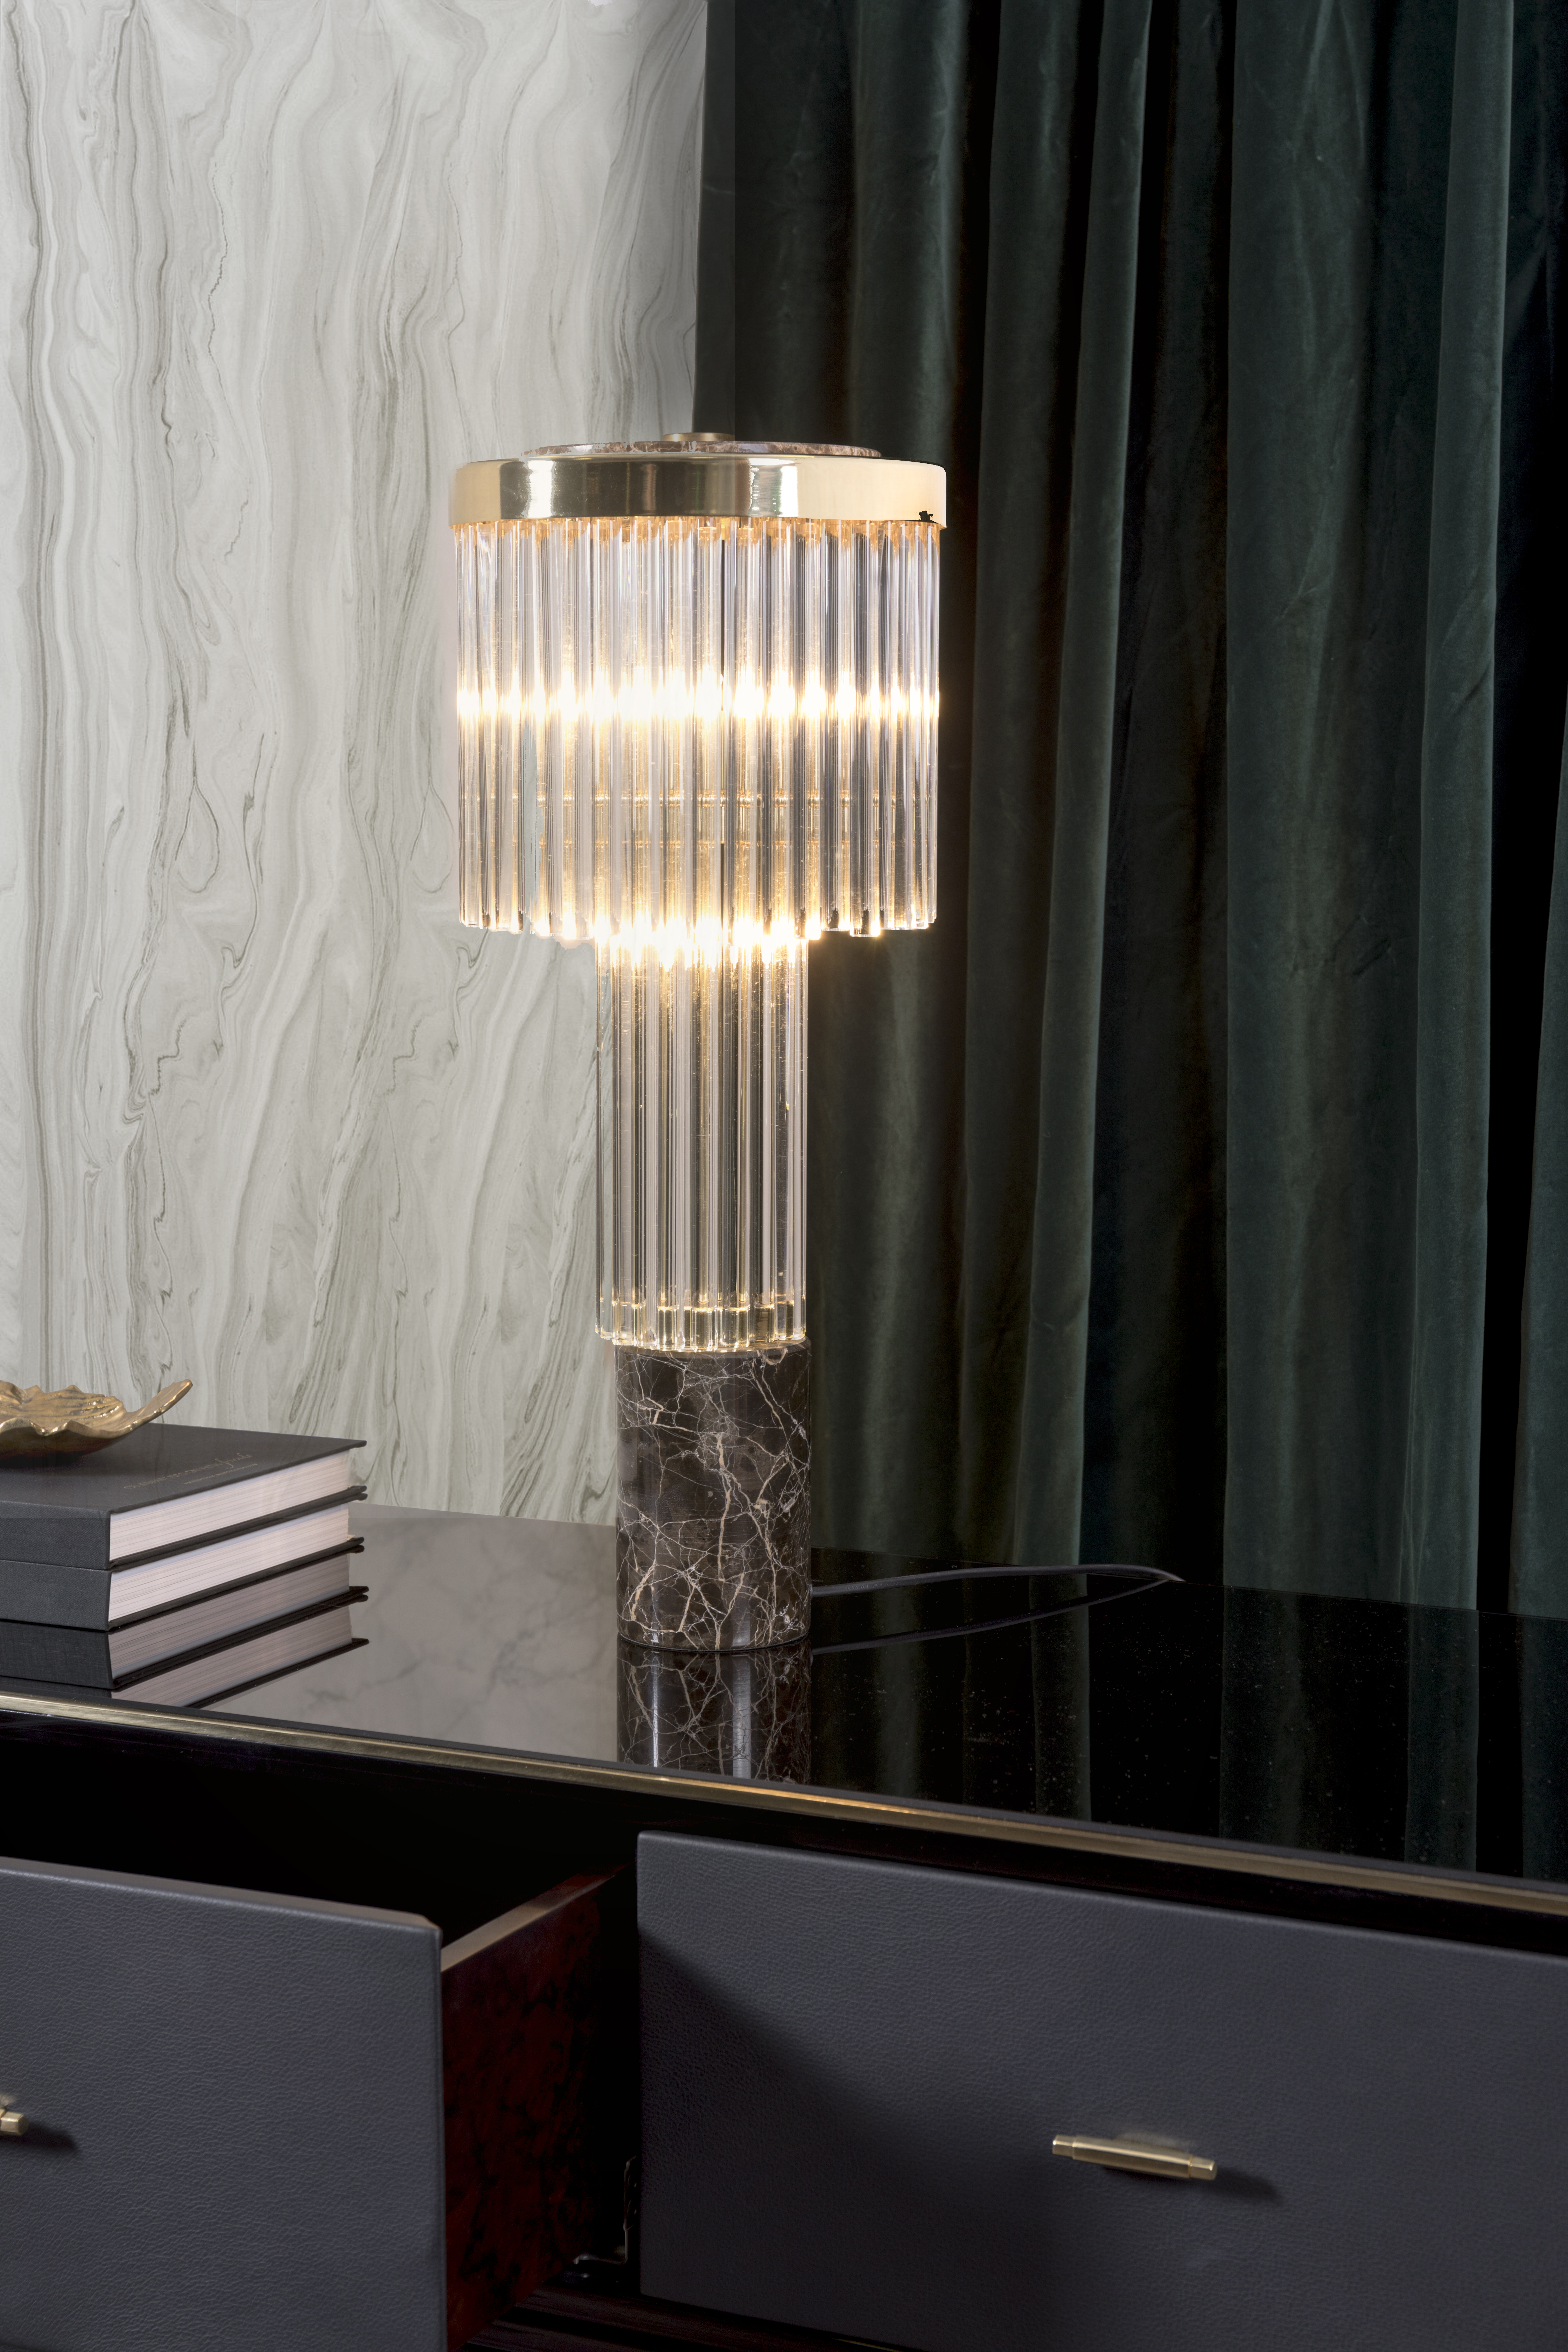 Product Of The Week: Pharo I Table Lamp